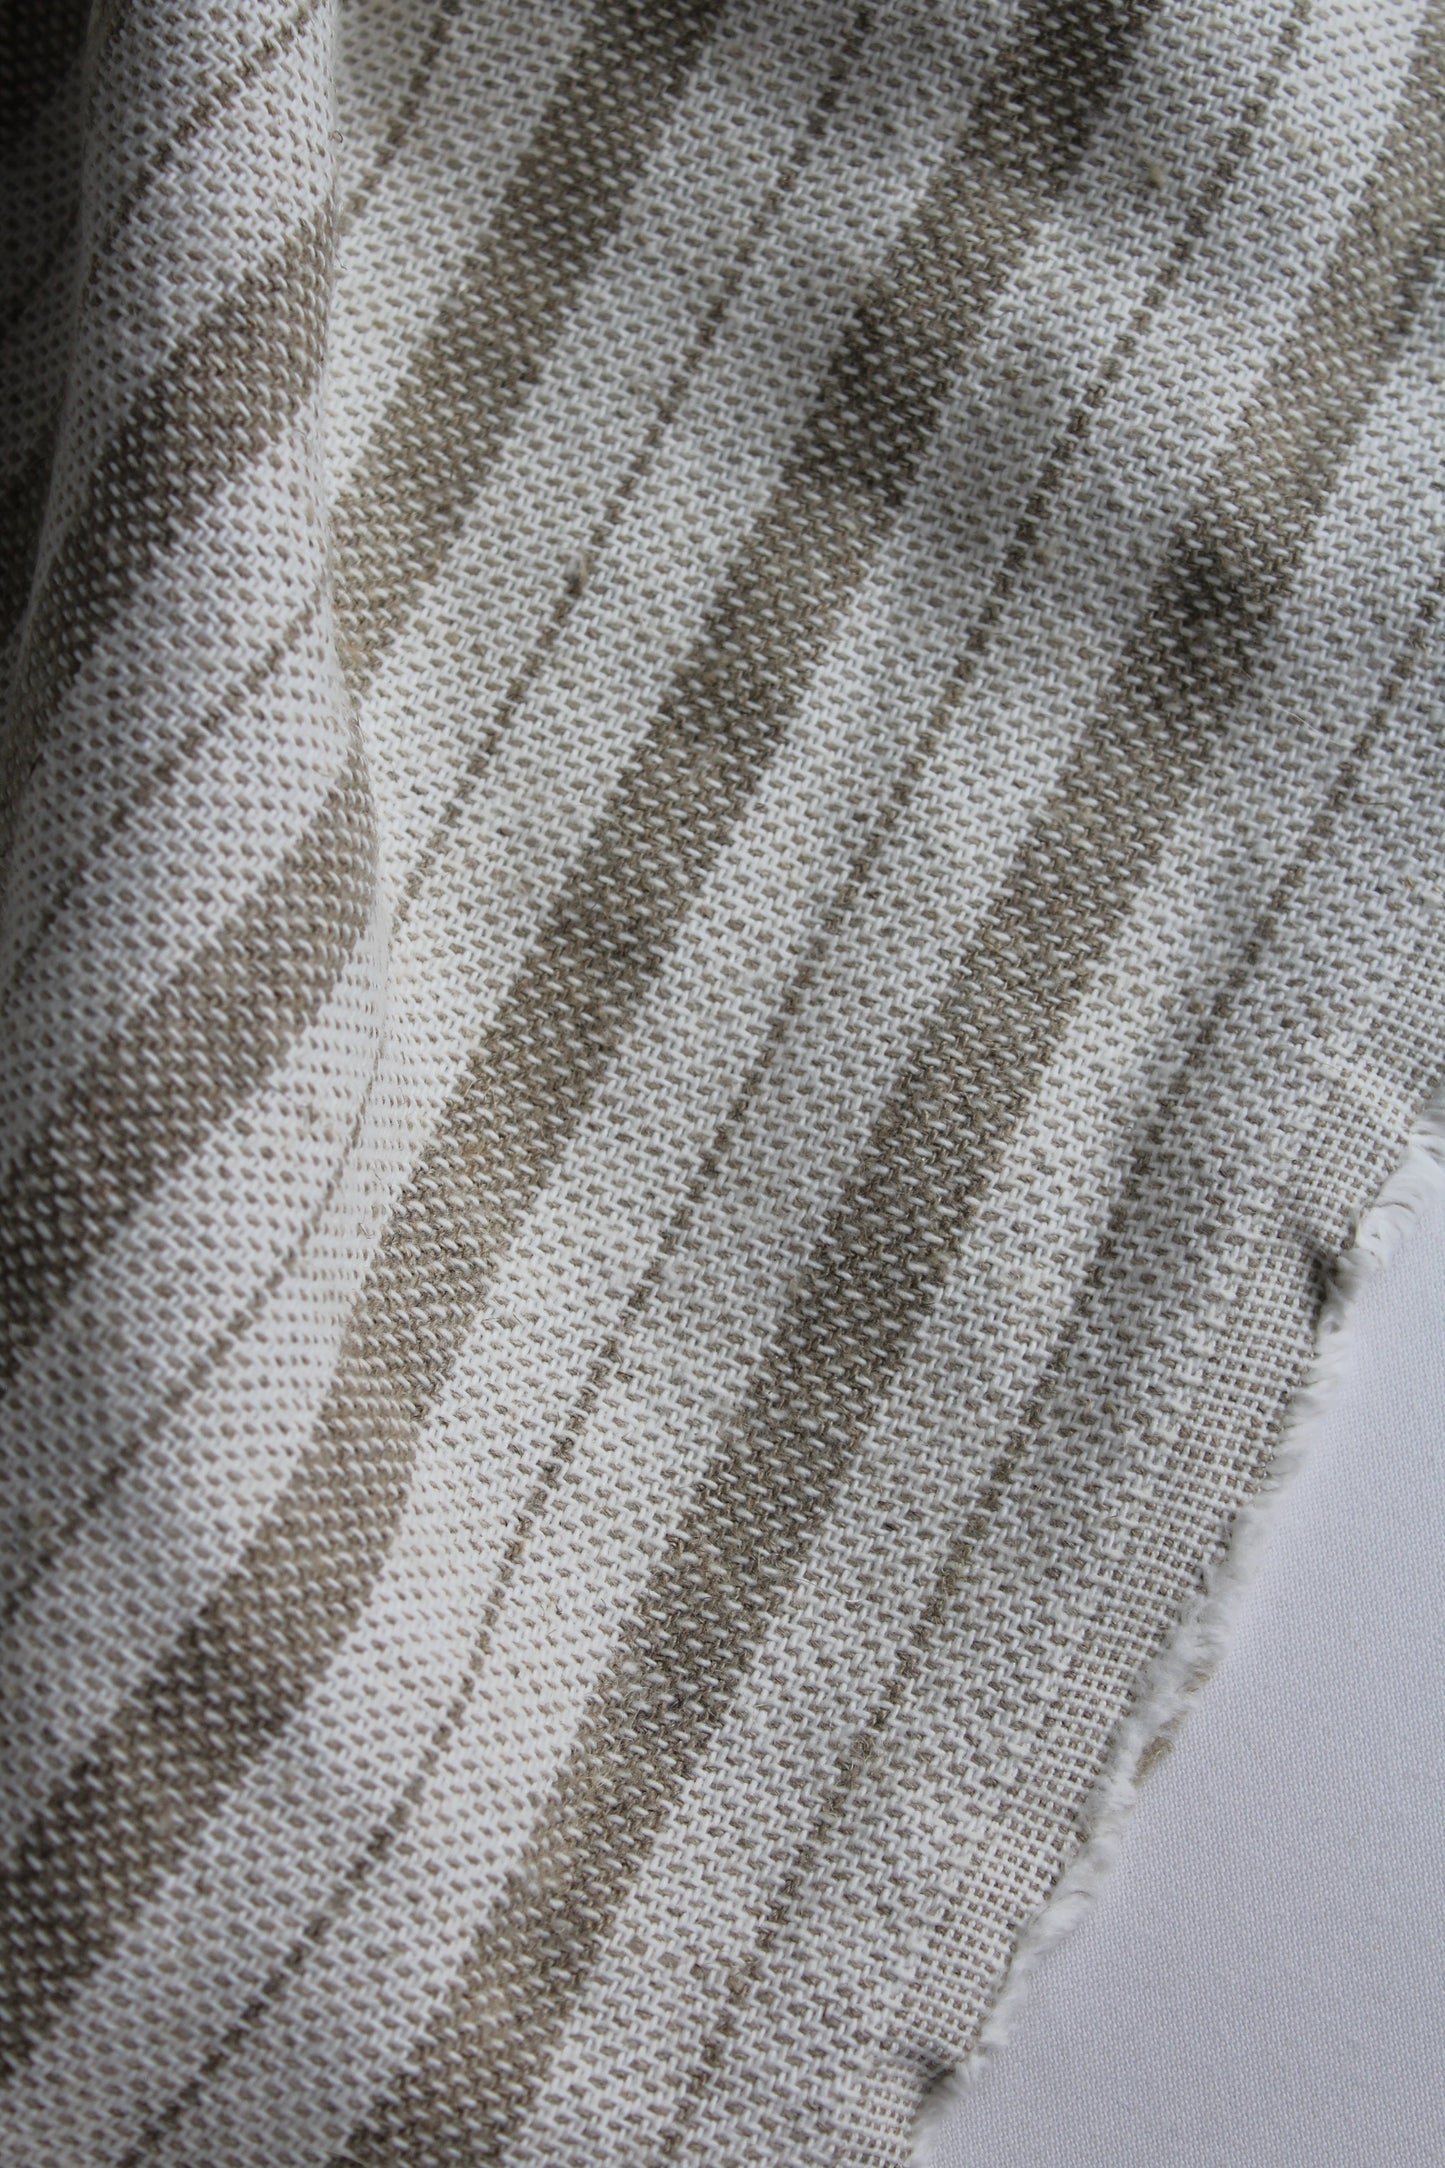 pure natural flax linen sand beige and oatmeal, natural rustic stripe texture, medium weight fabric